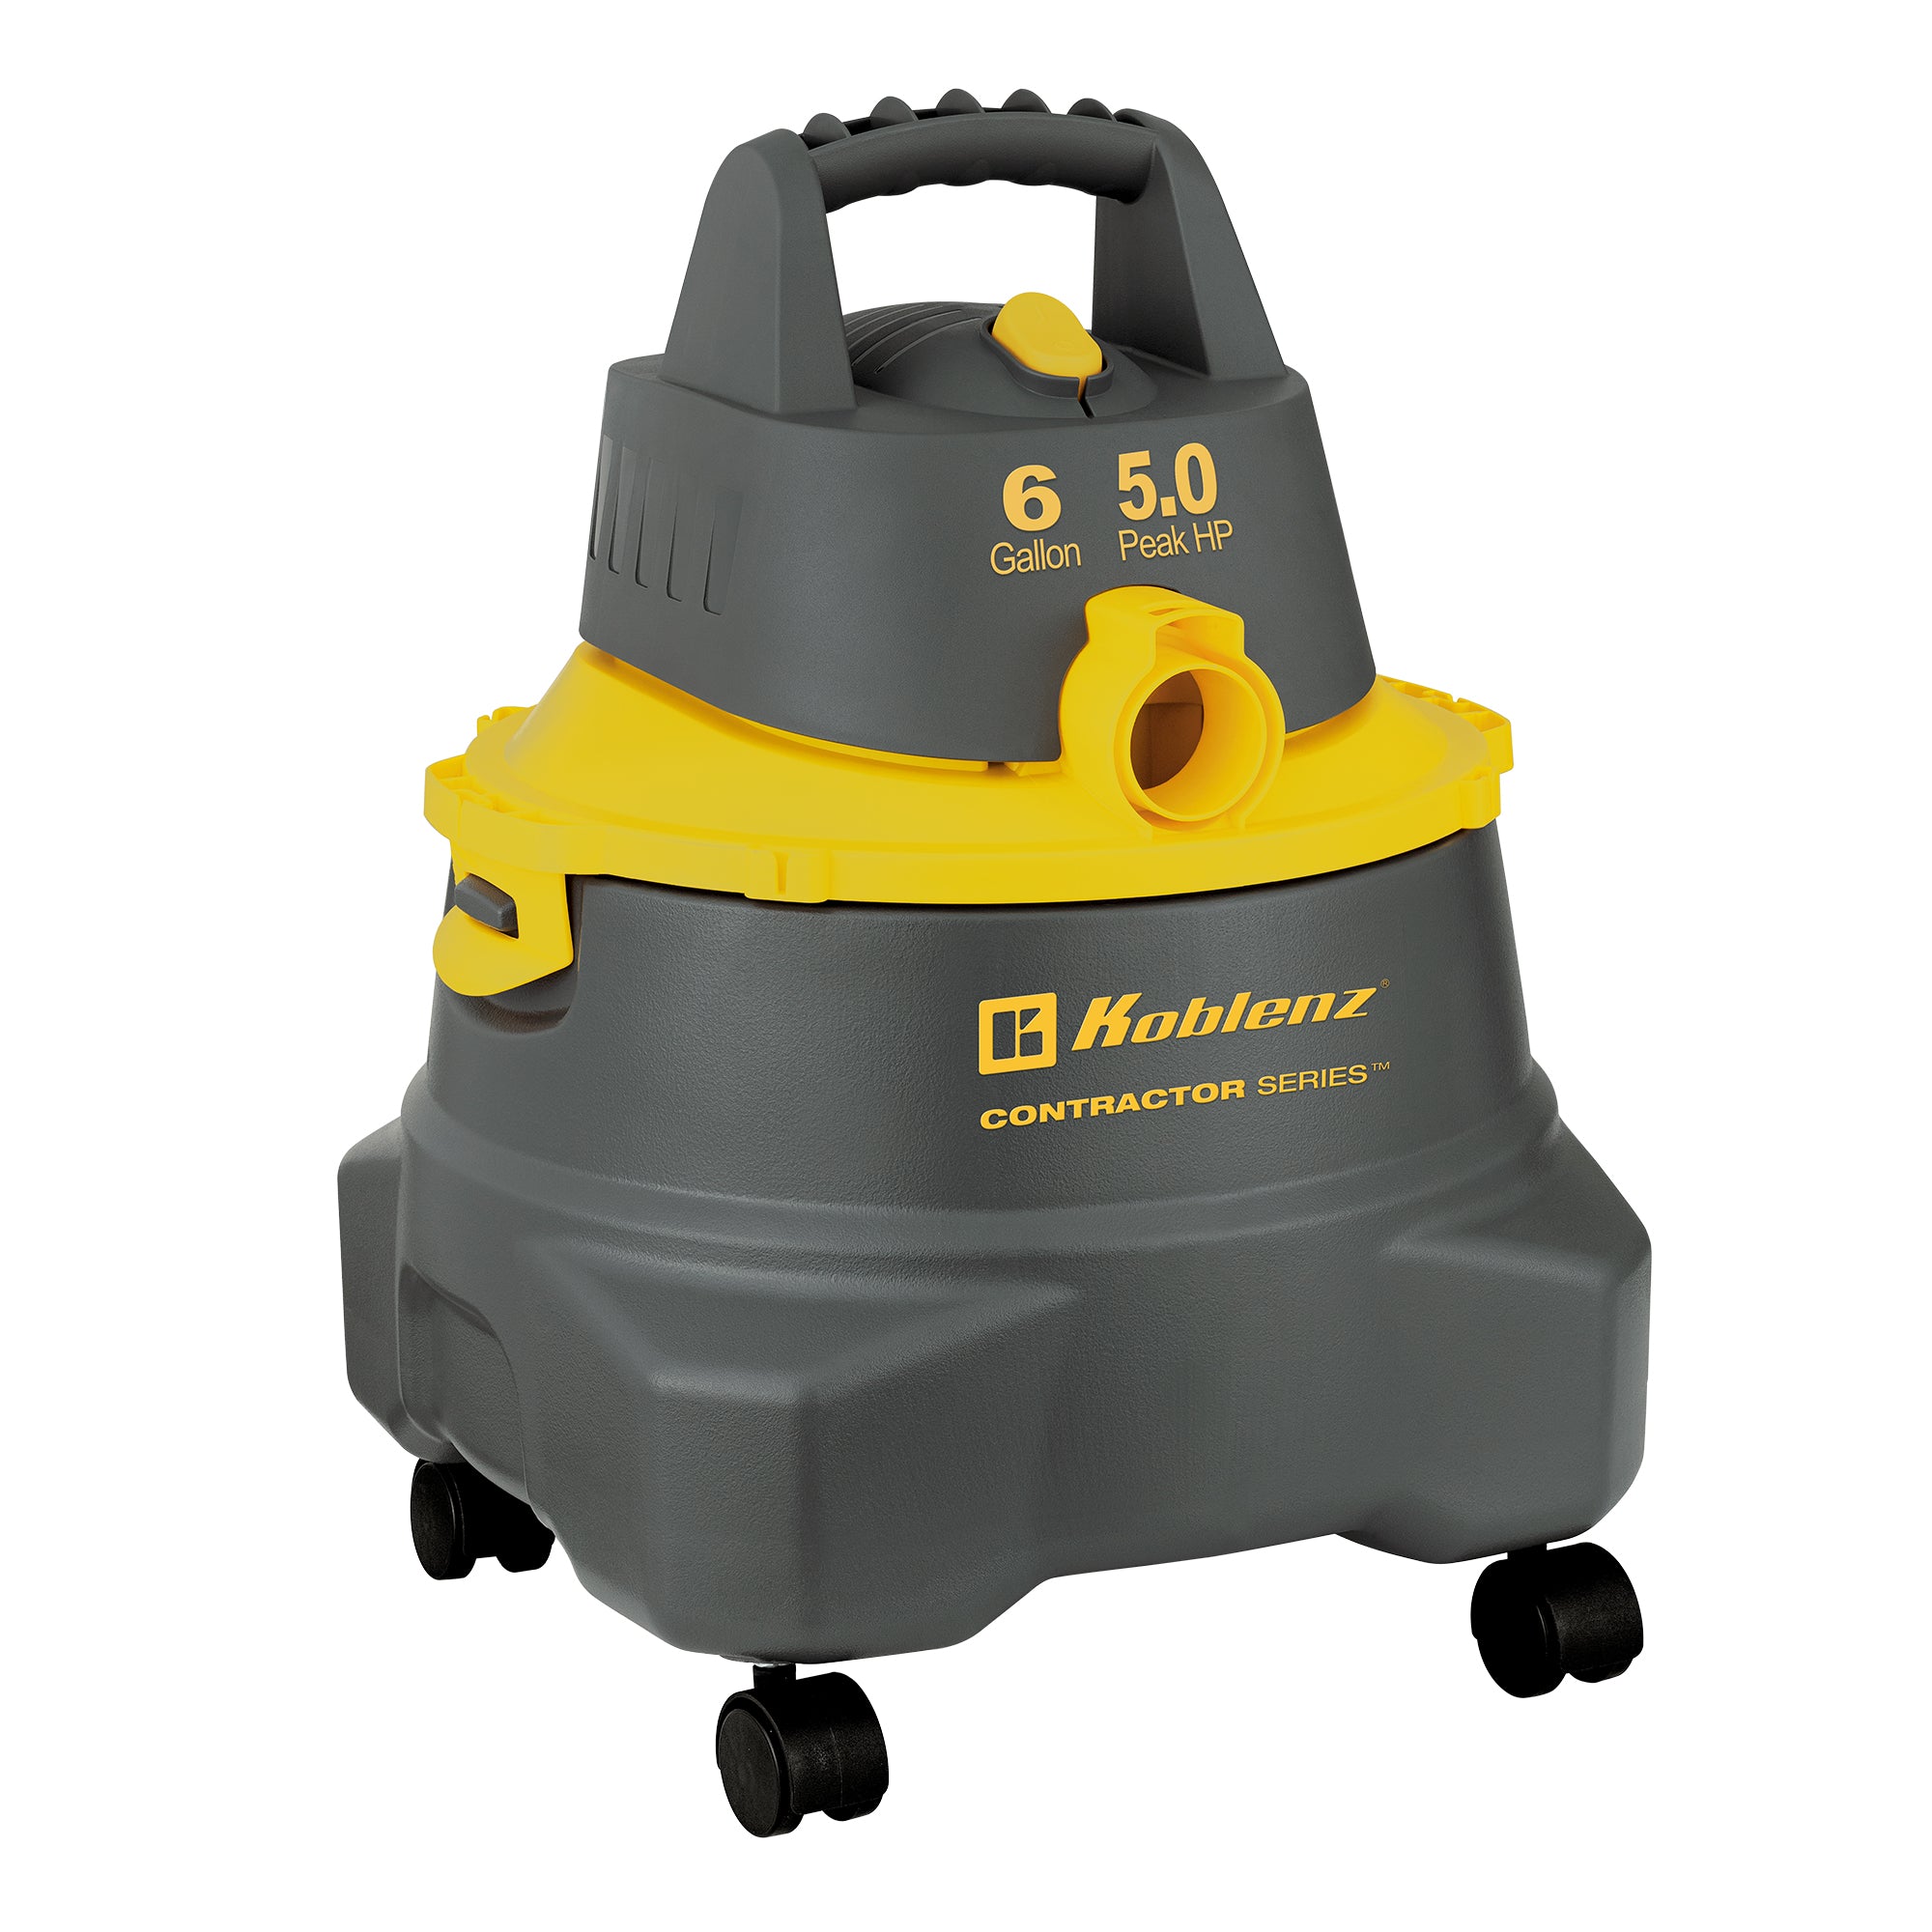 Contractor 6 Gallon 5.0 PHP Wet Dry Shop Vacuum WD-6 C212